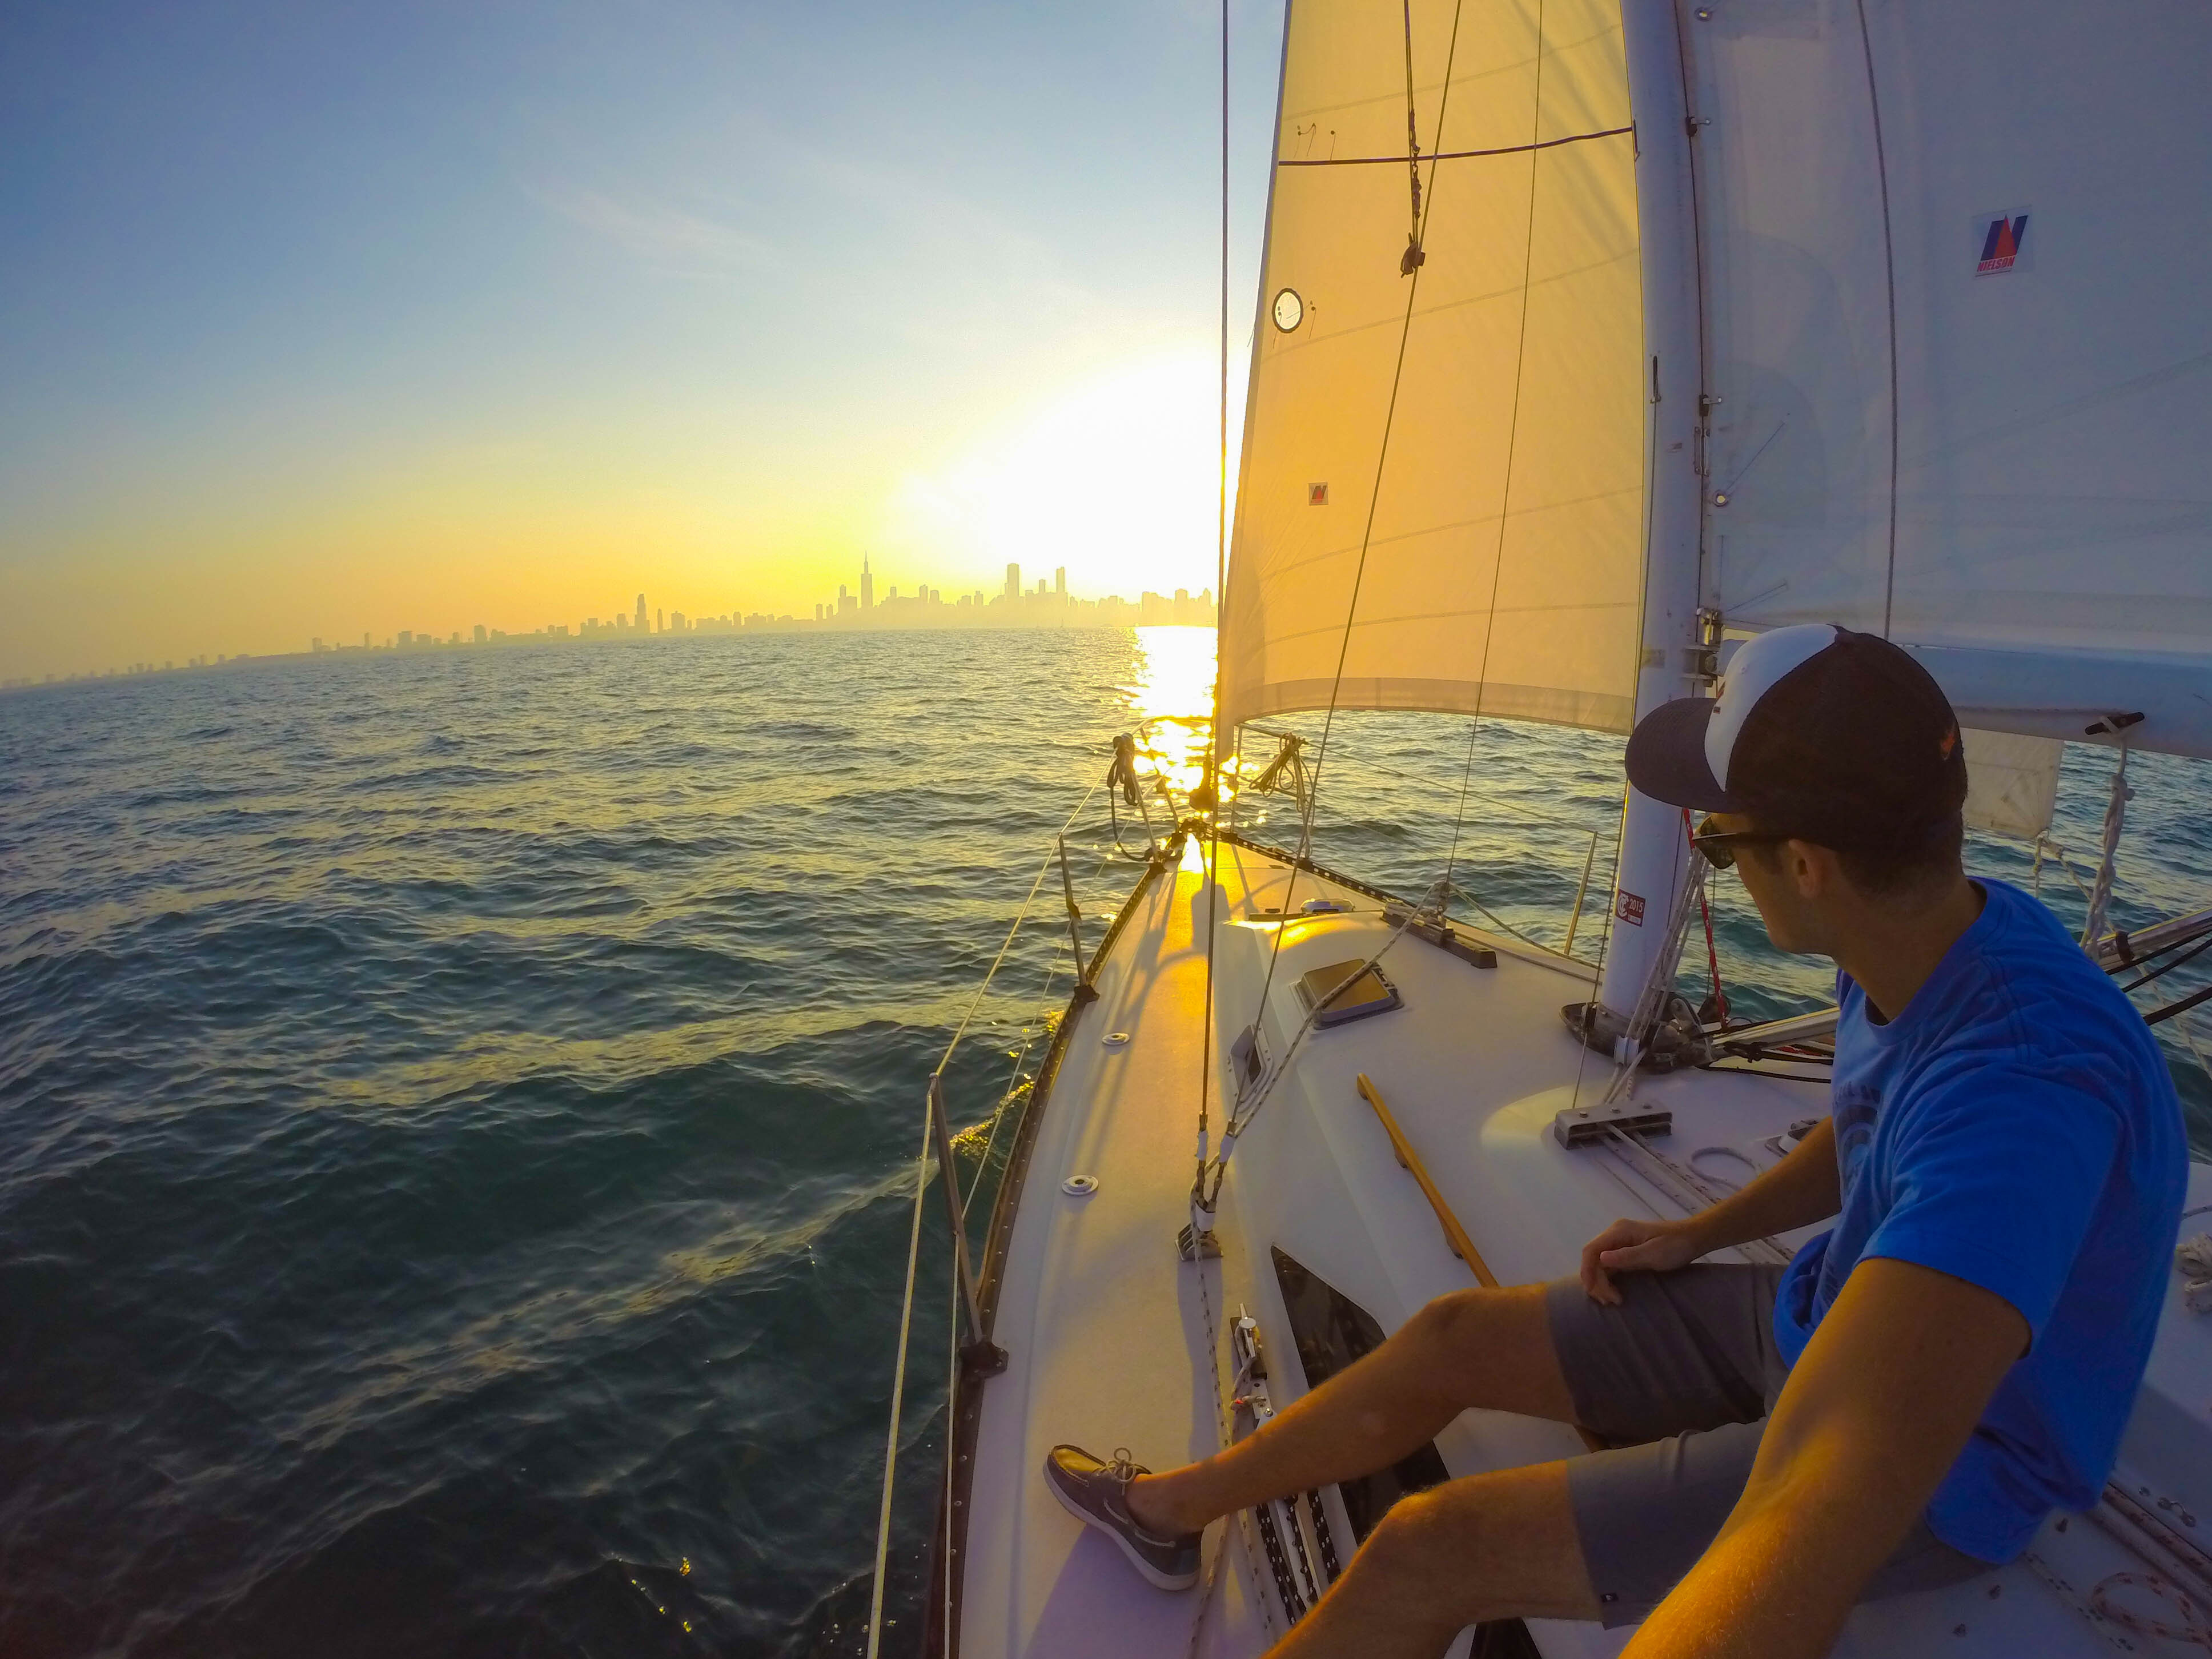 Man sails his boat on Lake Michigan in Chicago.